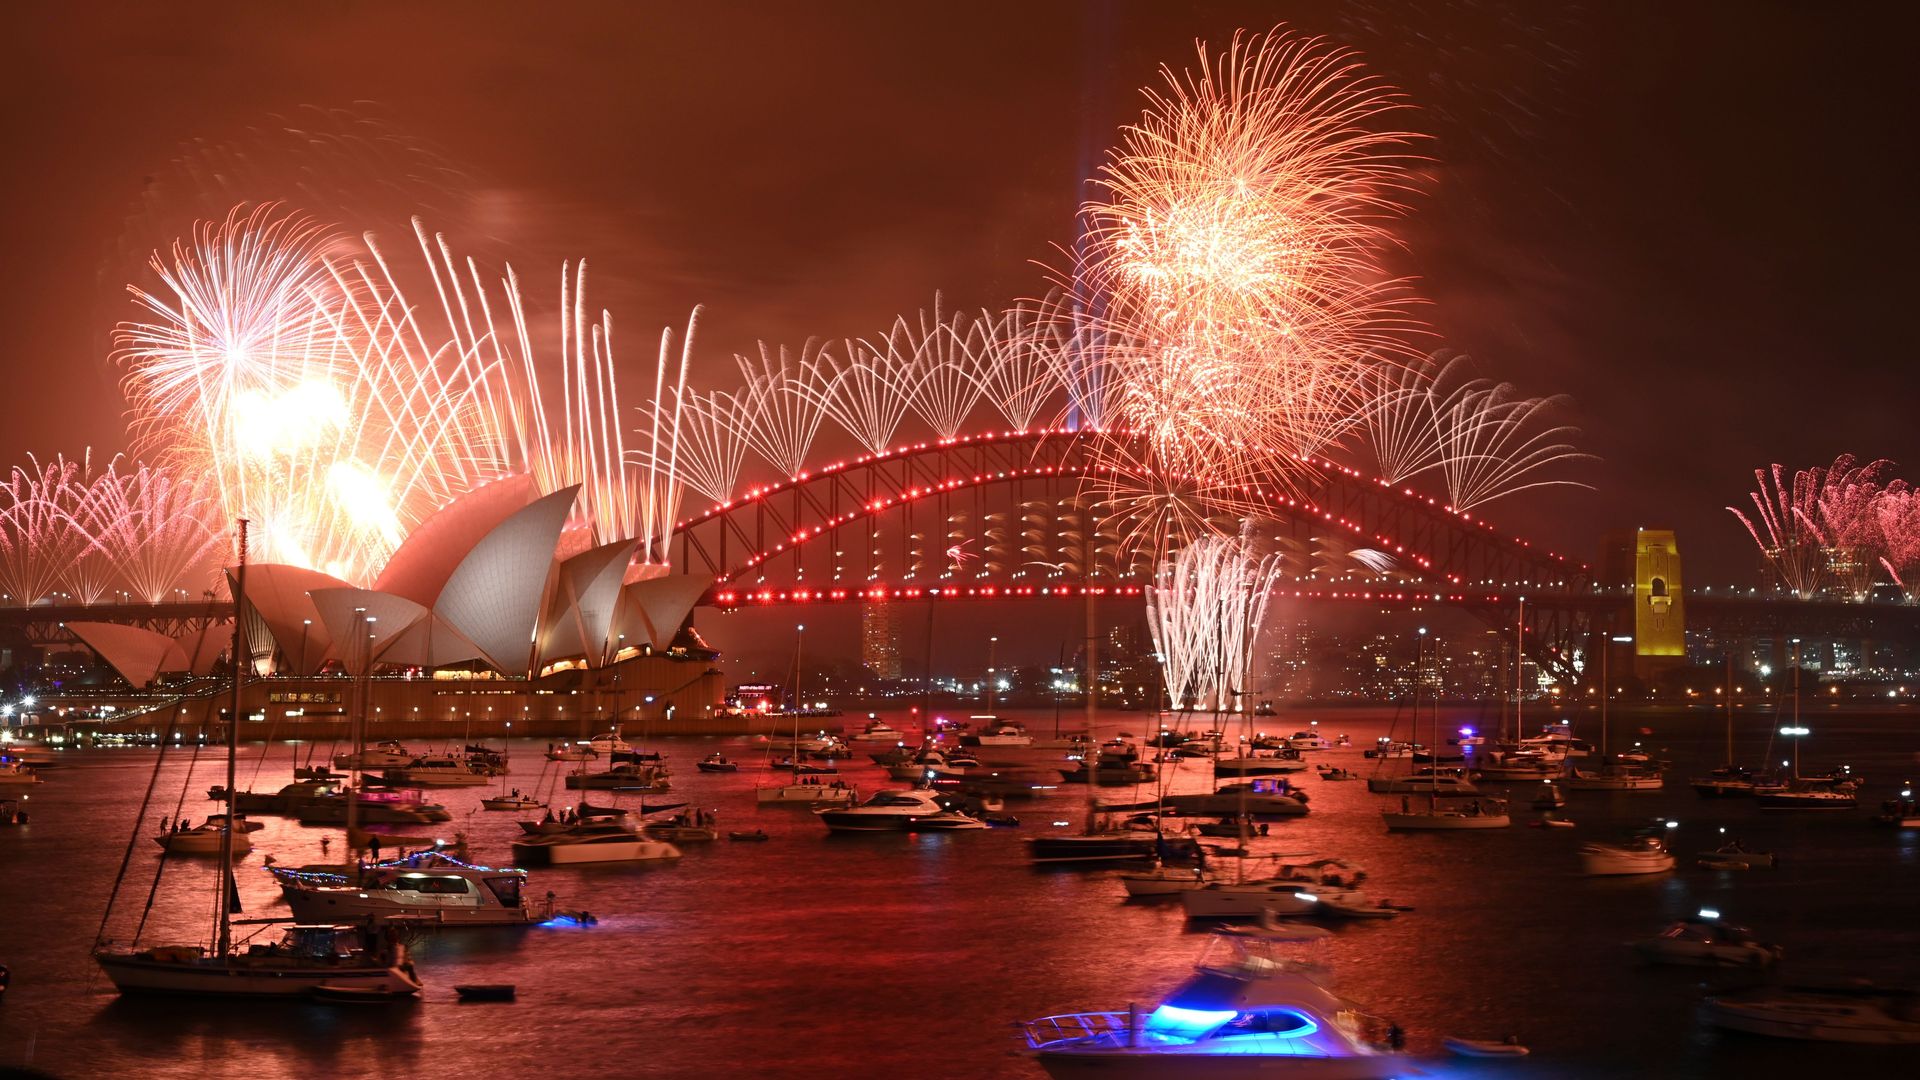 New Year's Eve fireworks erupt over Sydney's iconic Harbour Bridge and Opera House (L) during the fireworks show on January 1, 2020.